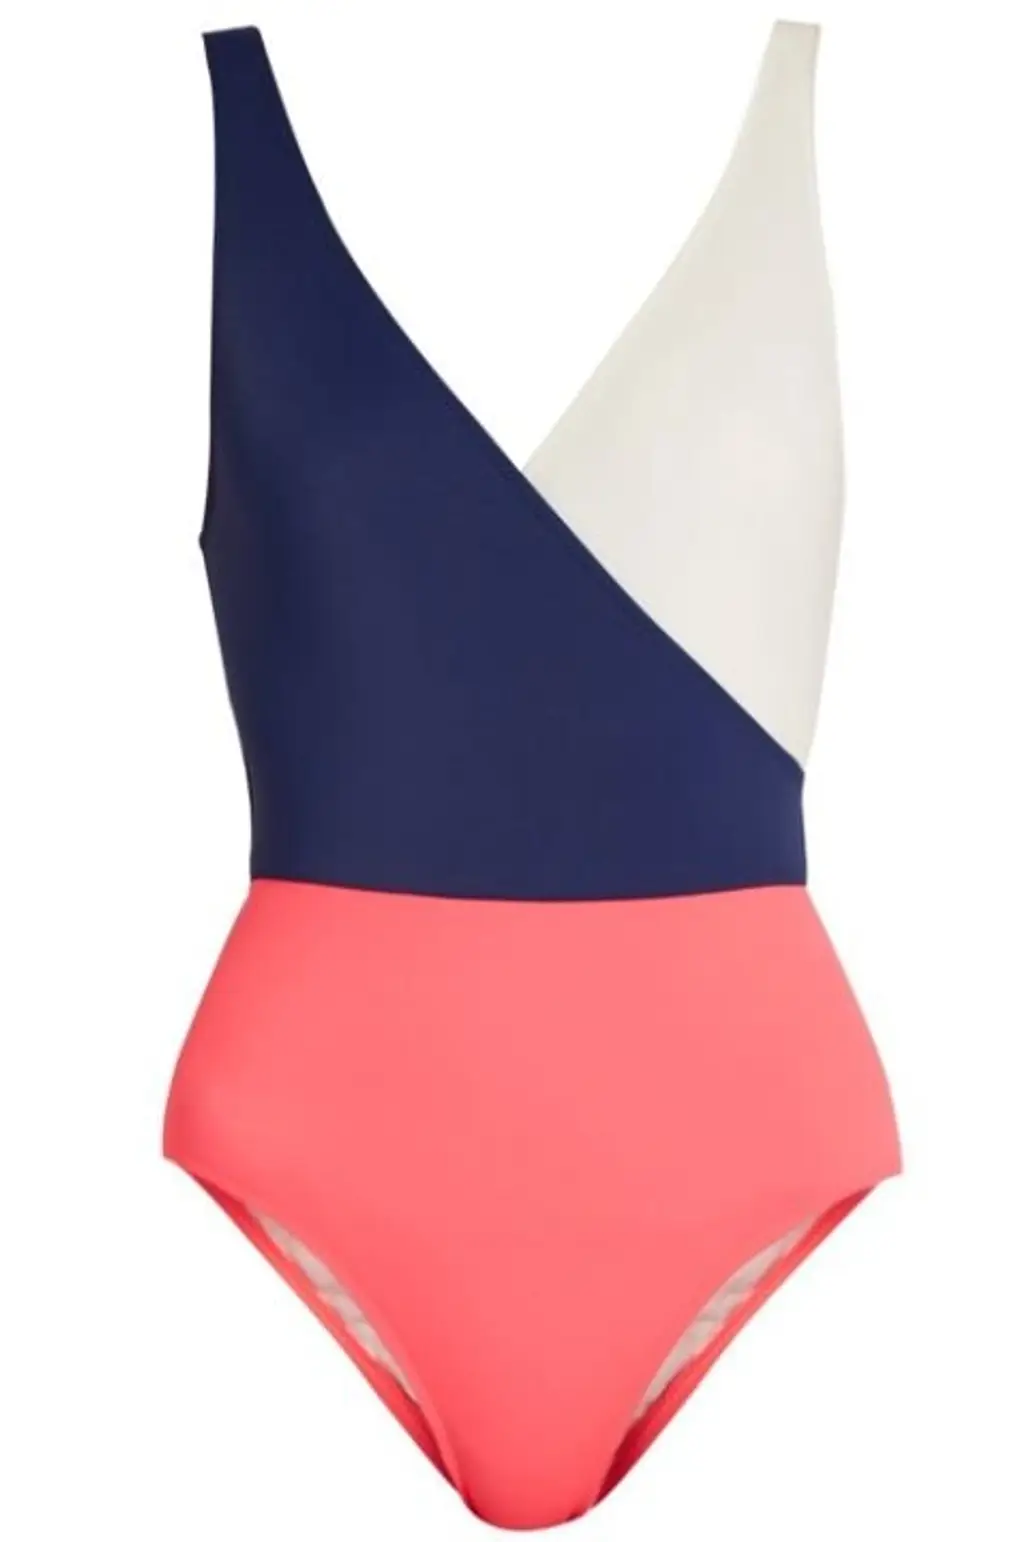 swimwear, clothing, one piece swimsuit, active undergarment, maillot,